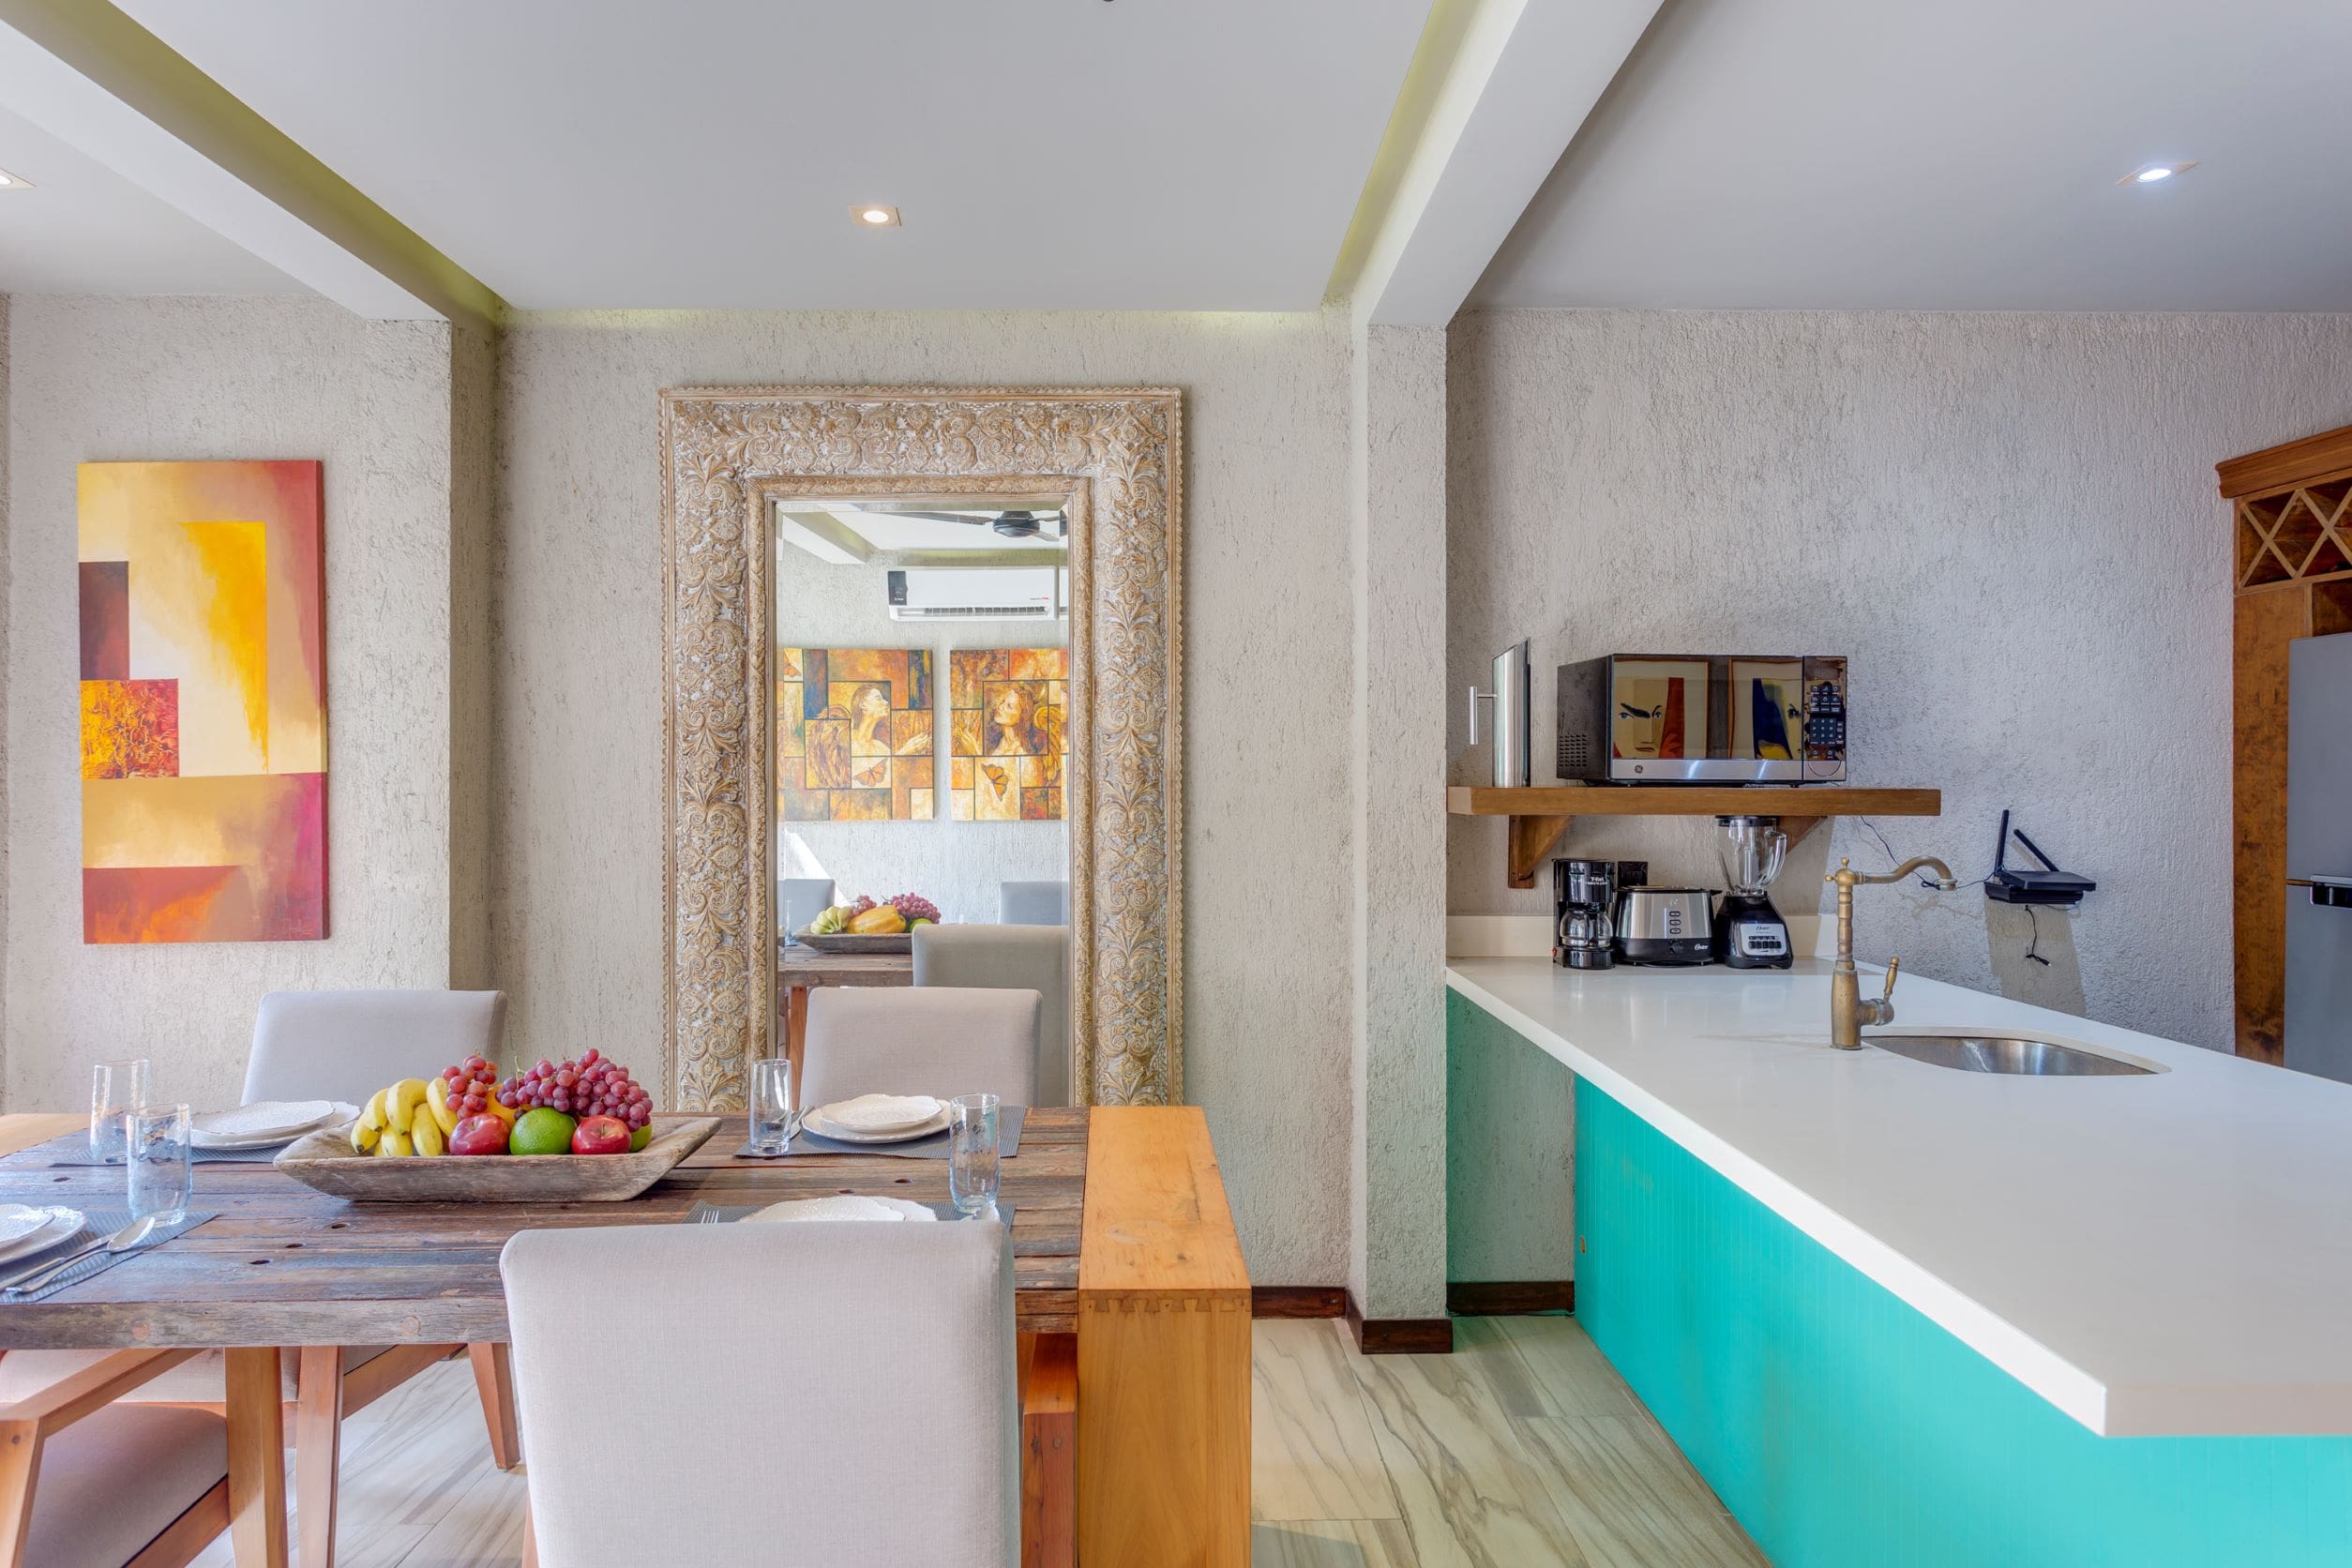 tulum real estate condos arthouse gf kitchen and dining area